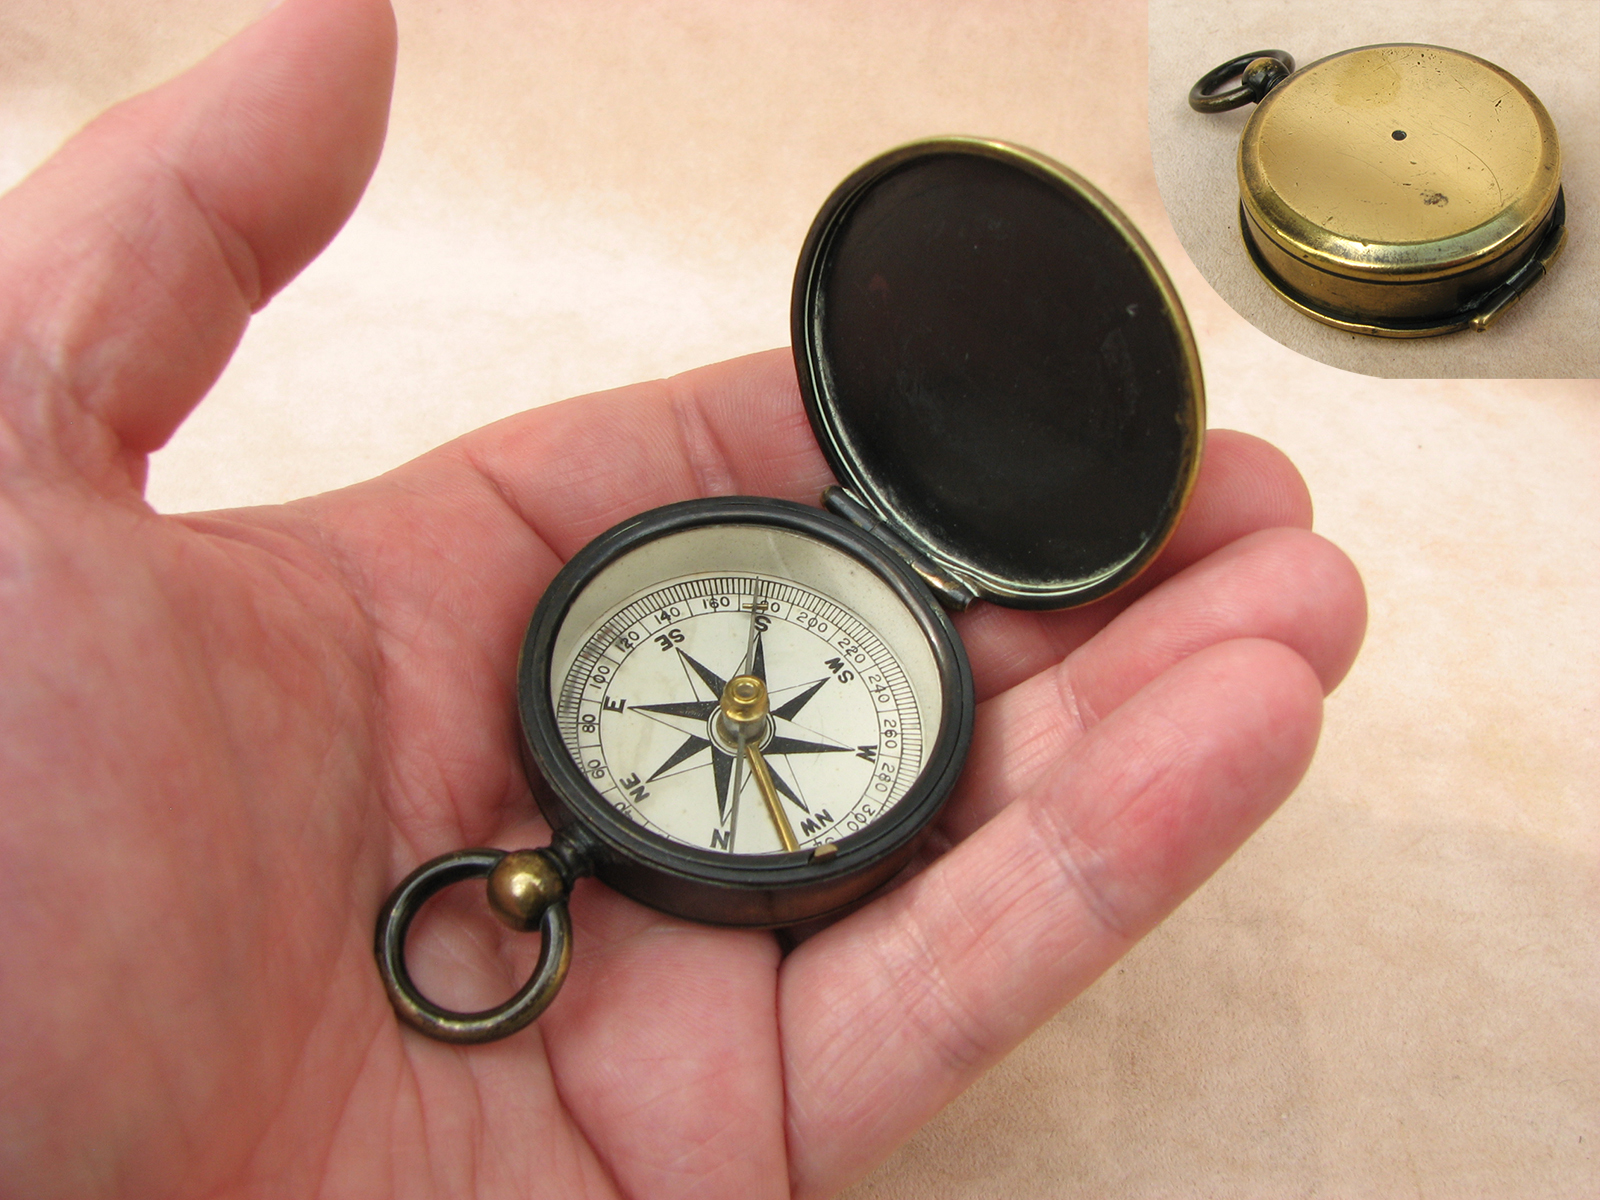 Late 19th century hunter cased pocket compass signed ROSS LONDON